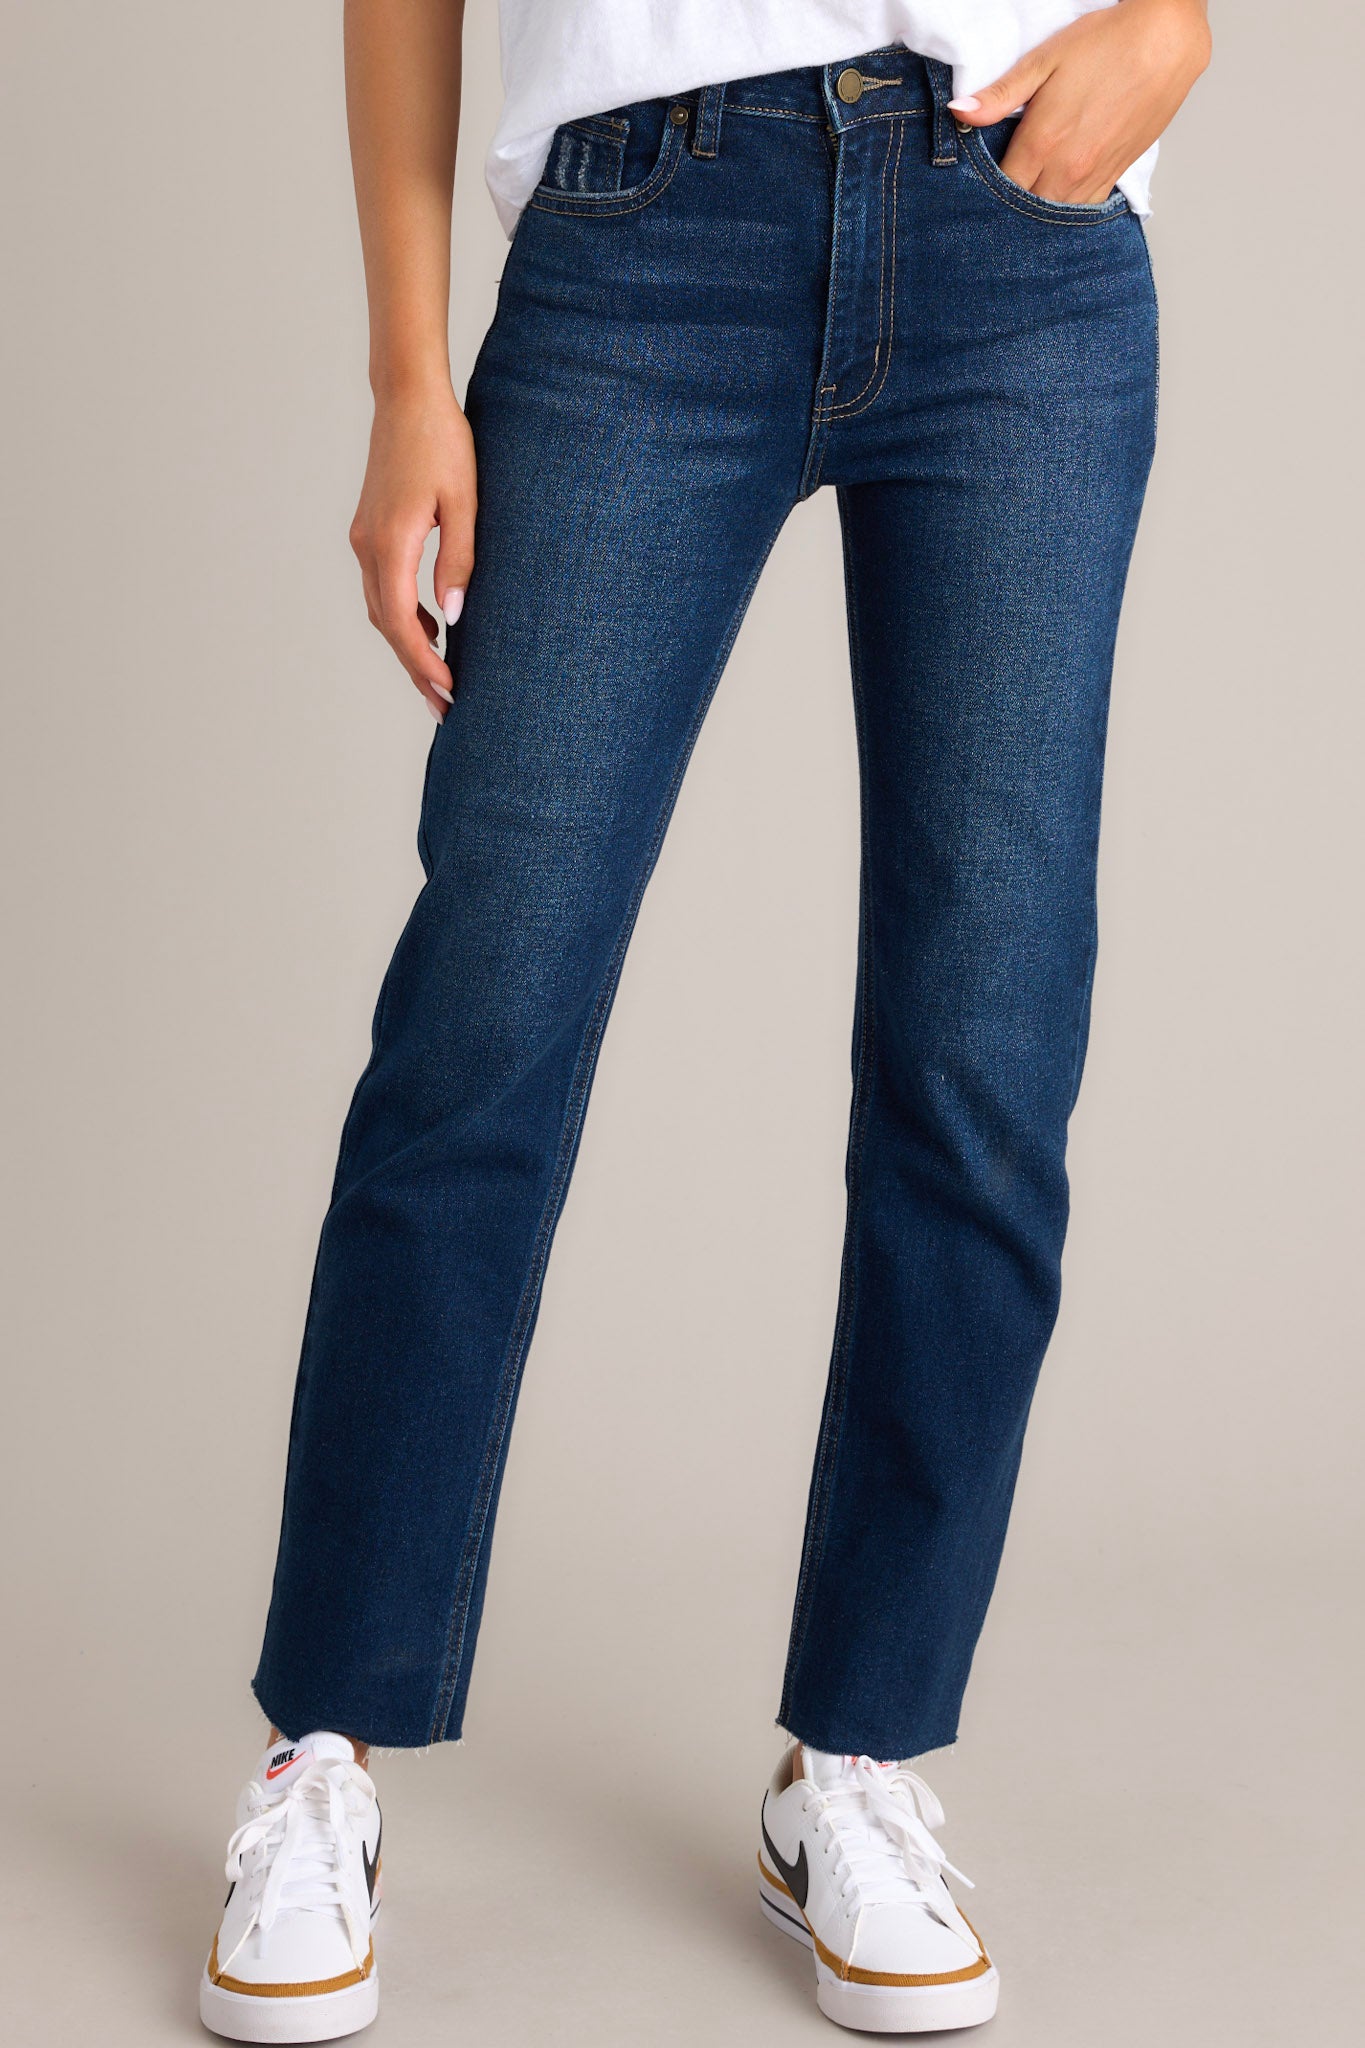 Front angled view of dark wash denim jeans featuring a high-rise waist, scissor cut-off hem, functional pockets, belt loops, and a zipper button closure